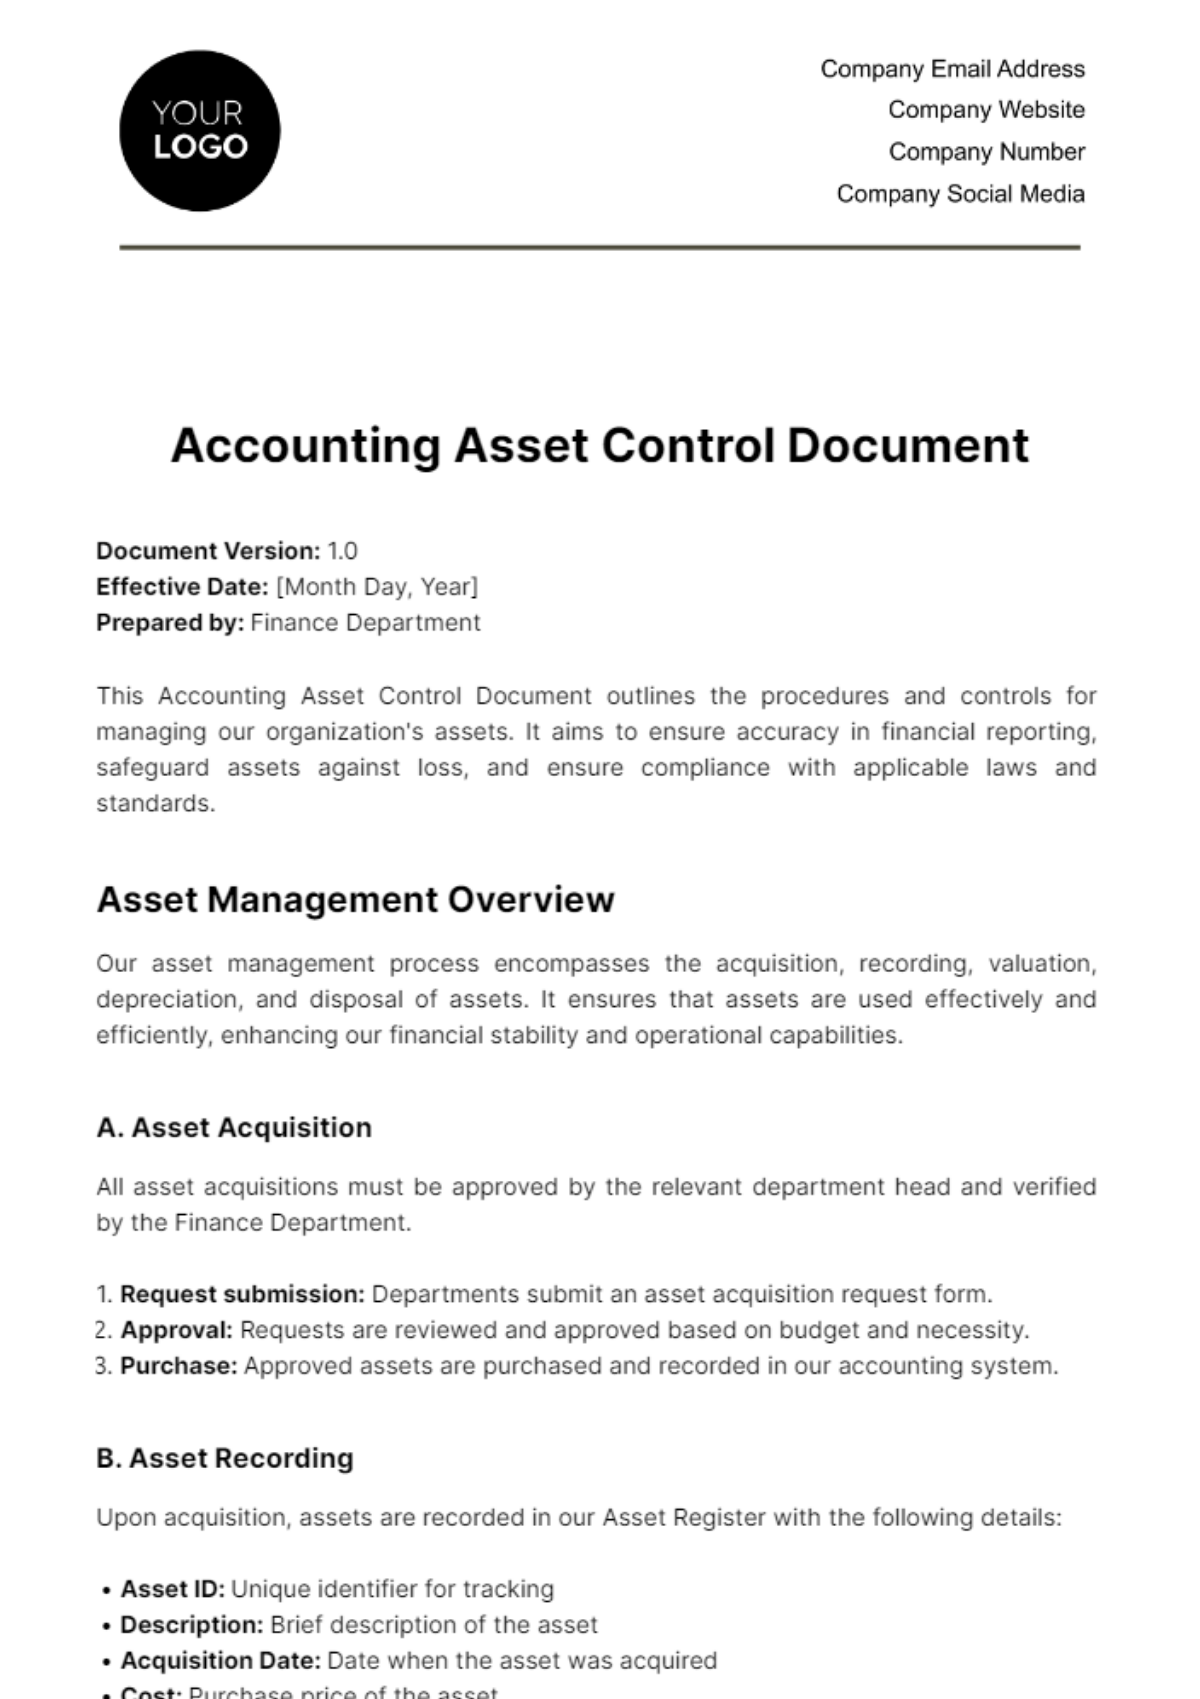 Accounting Asset Control Document Template